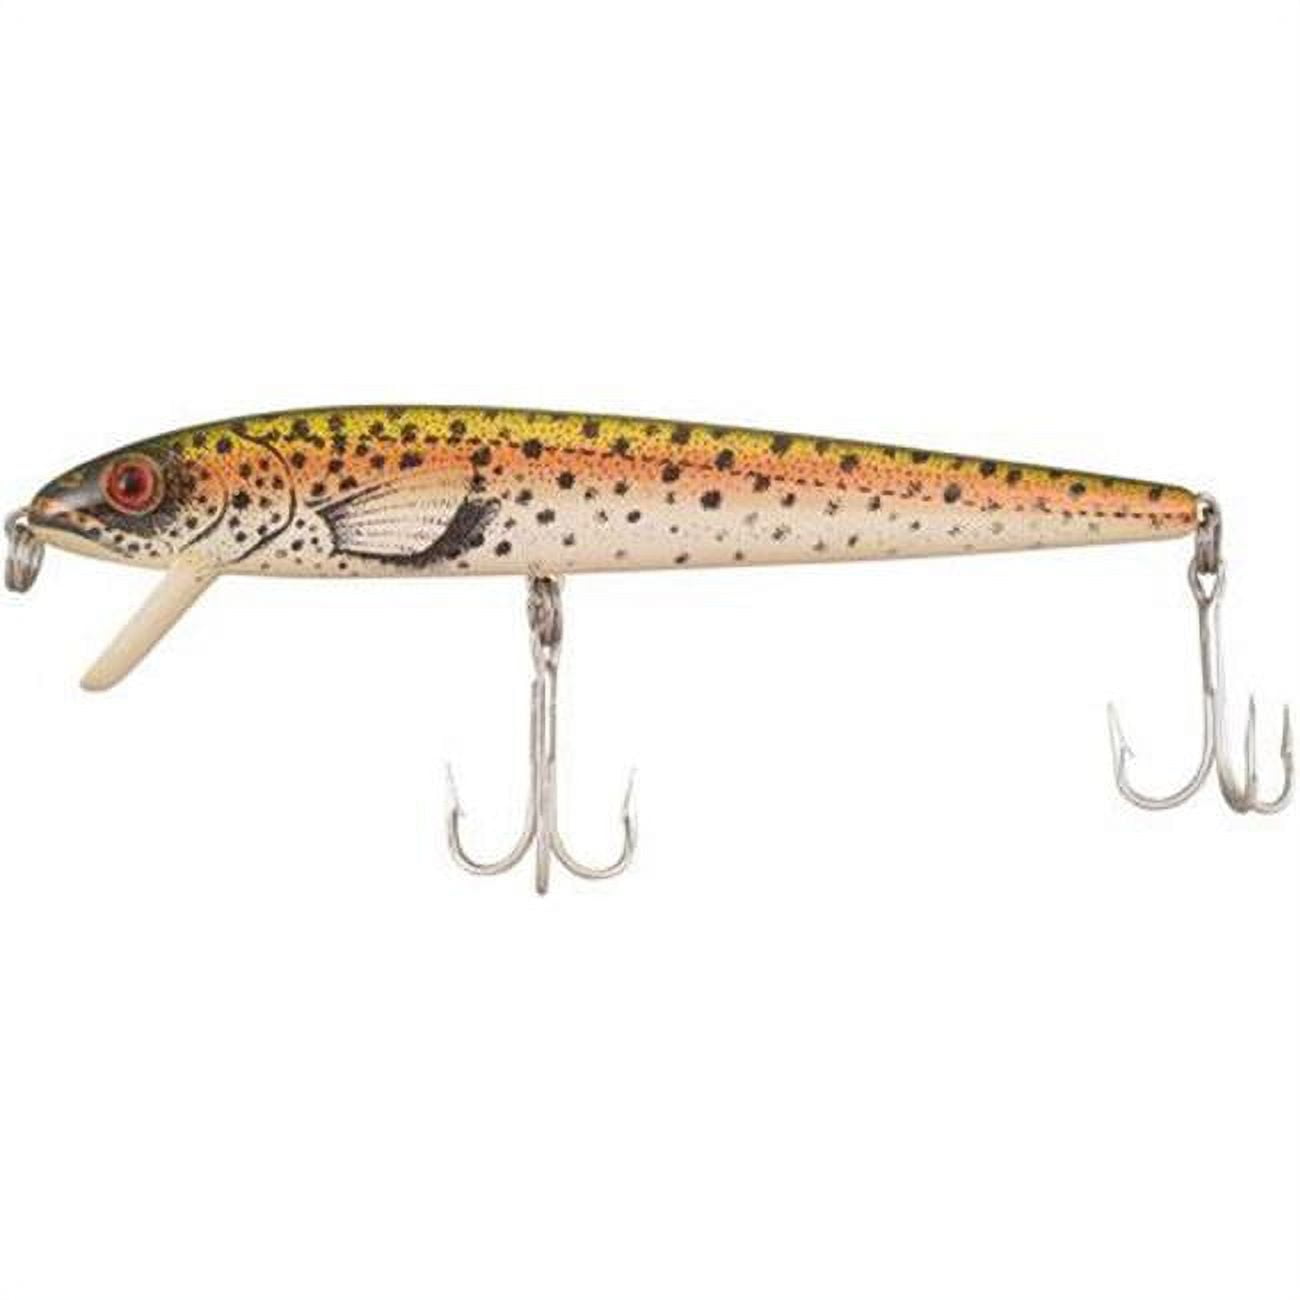 Cotton Cordell Red-Fin Fishing Lure Hard bait Rainbow Trout 7 in 1